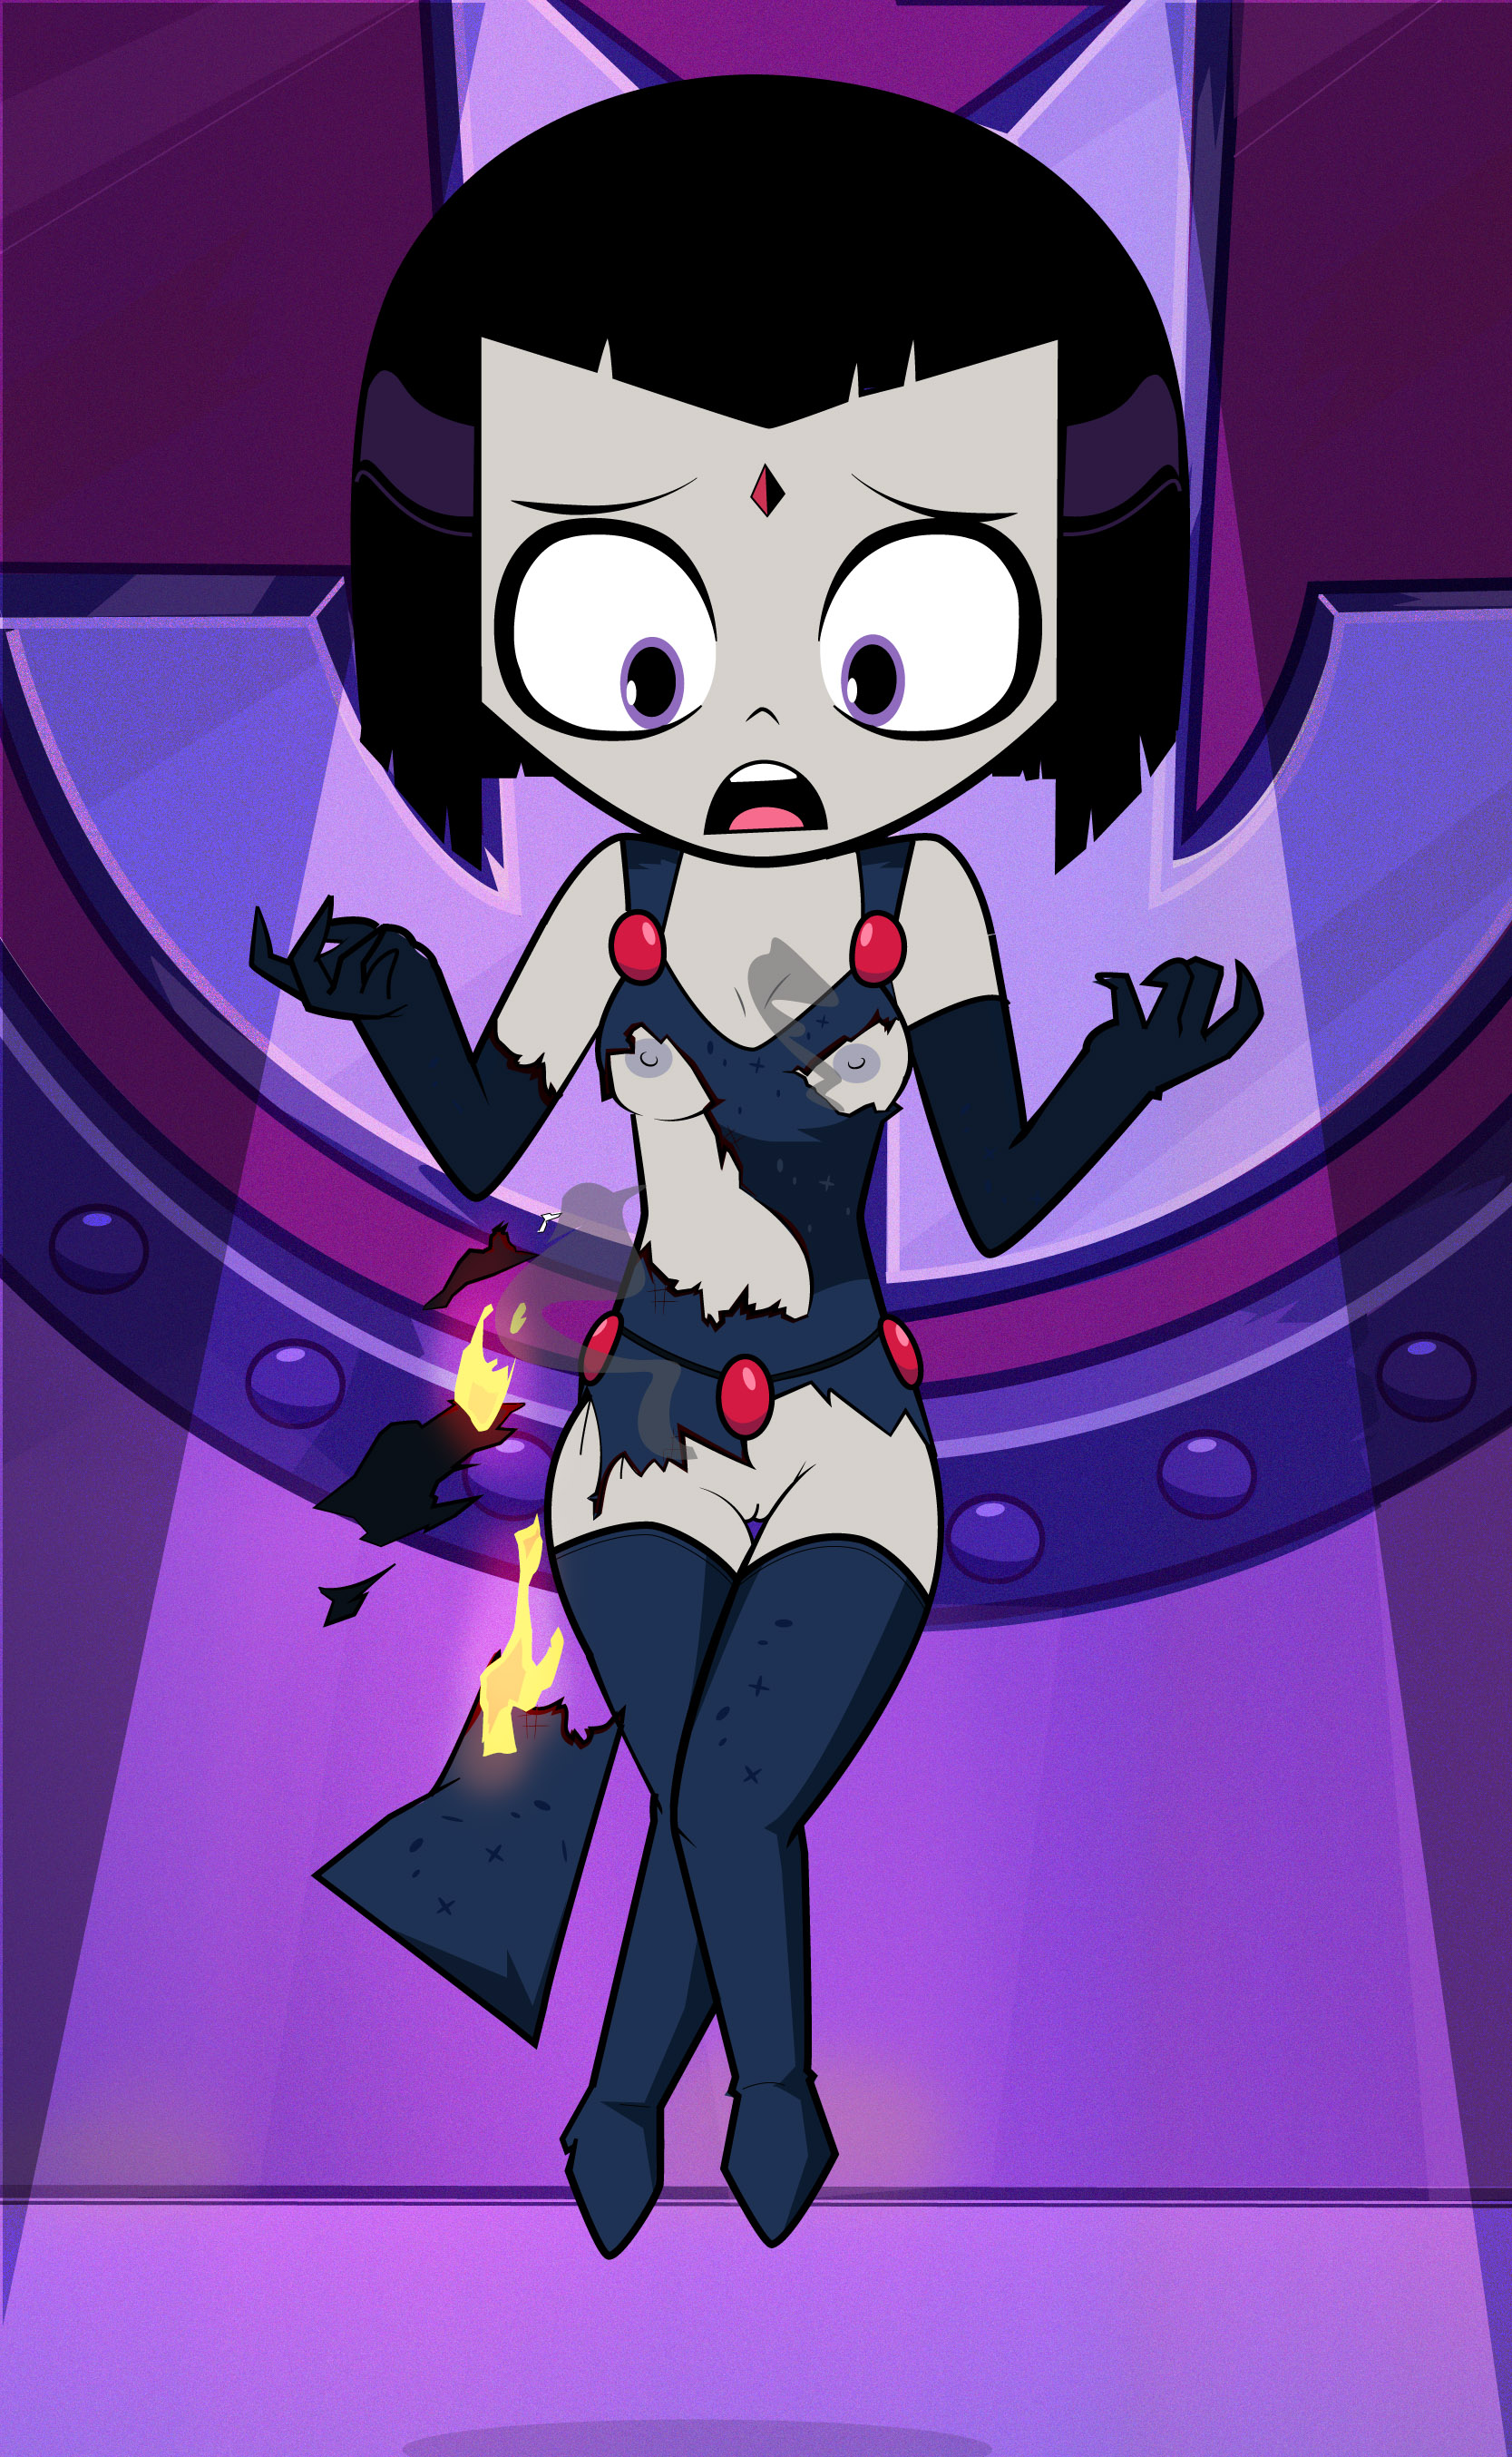 angelia greene recommends raven from teen titans go naked pic